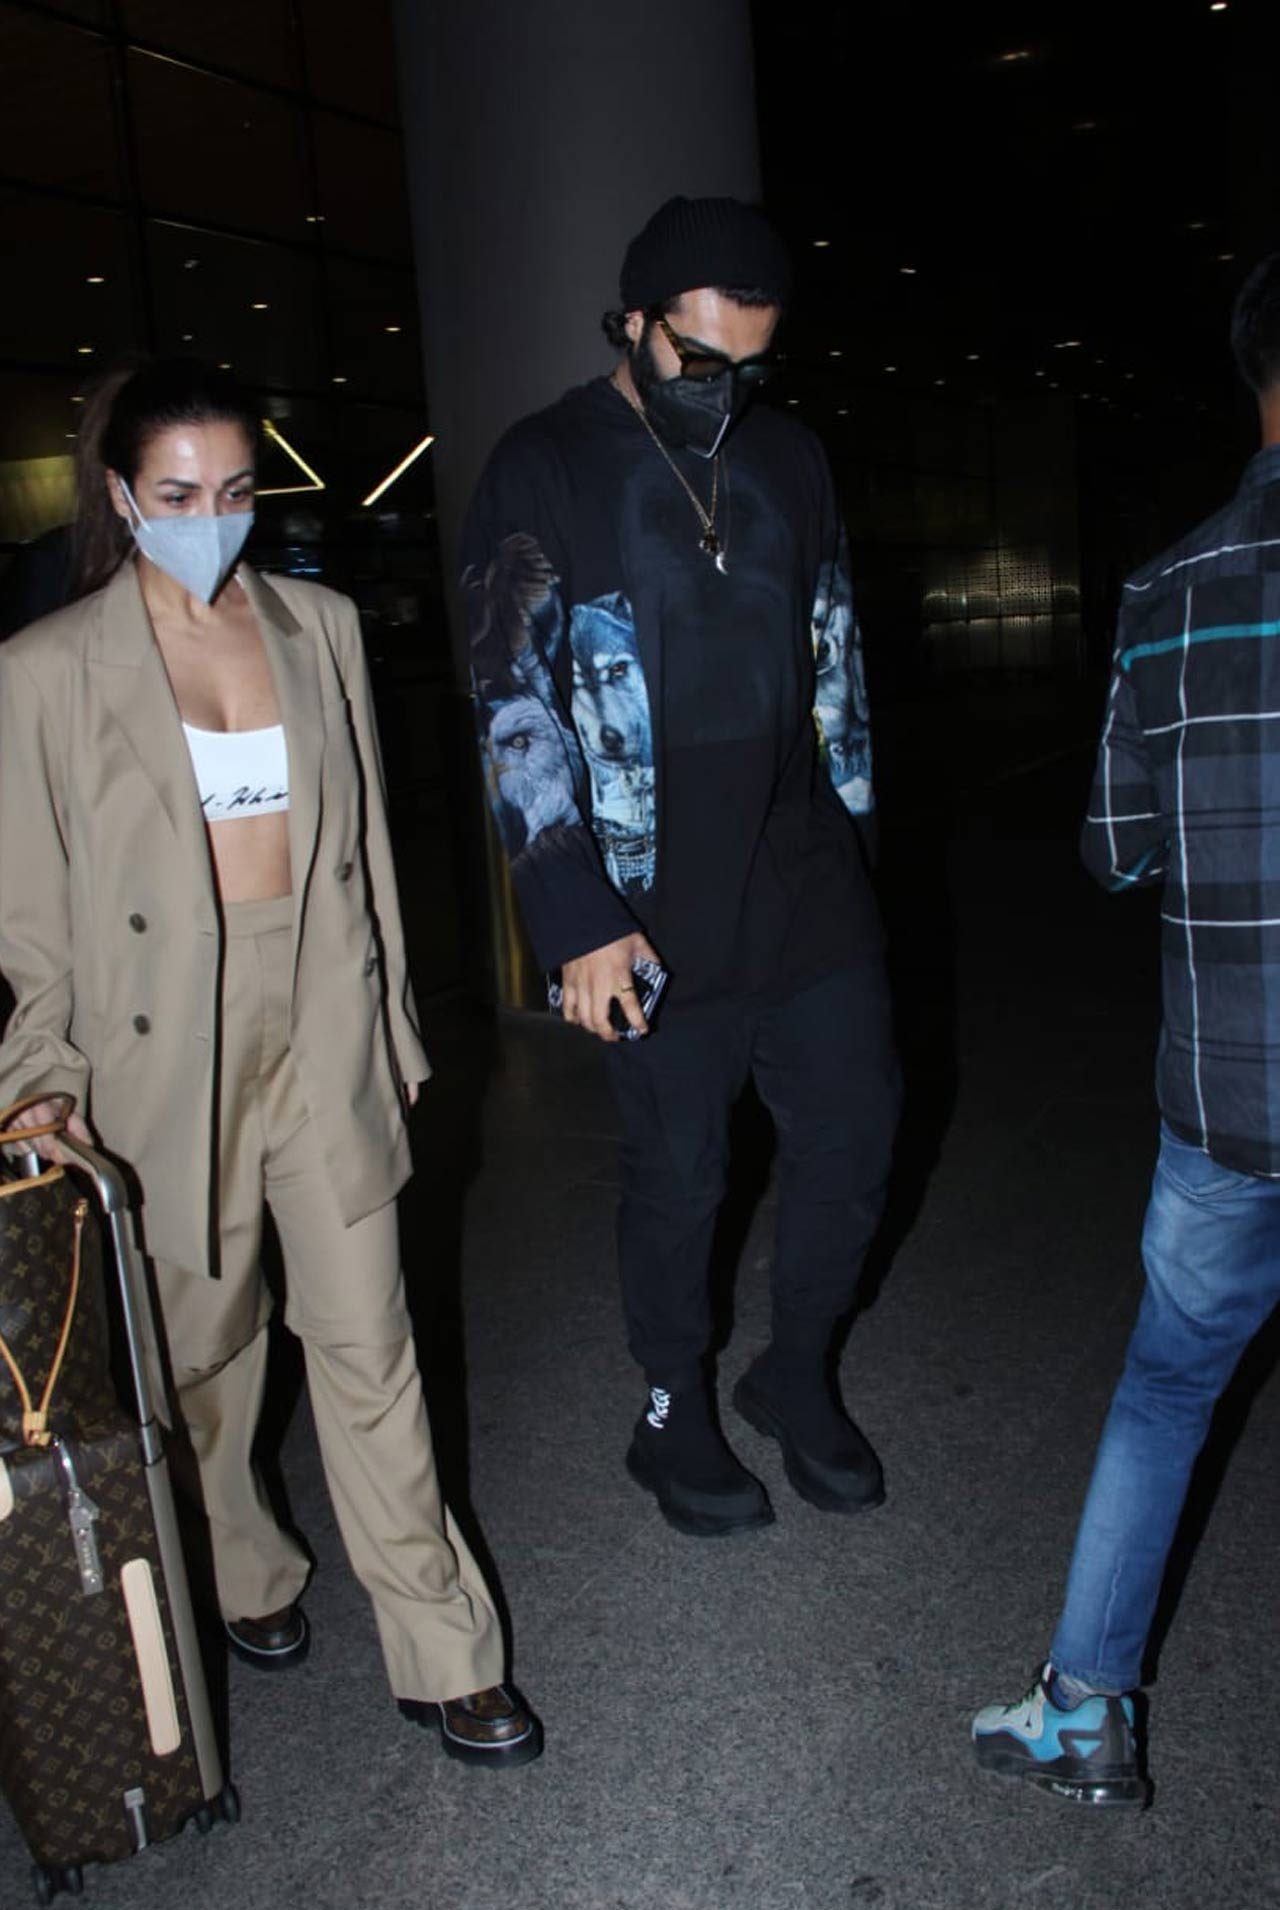 Arjun Kapoor also shared a cute video of Malaika, in which she was seen busy taking pictures of the street. The highlight of the video was Malaika wearing Arjun's blue hooded jumper that she teamed up with leather joggers and a pair of bright pink colour sliders